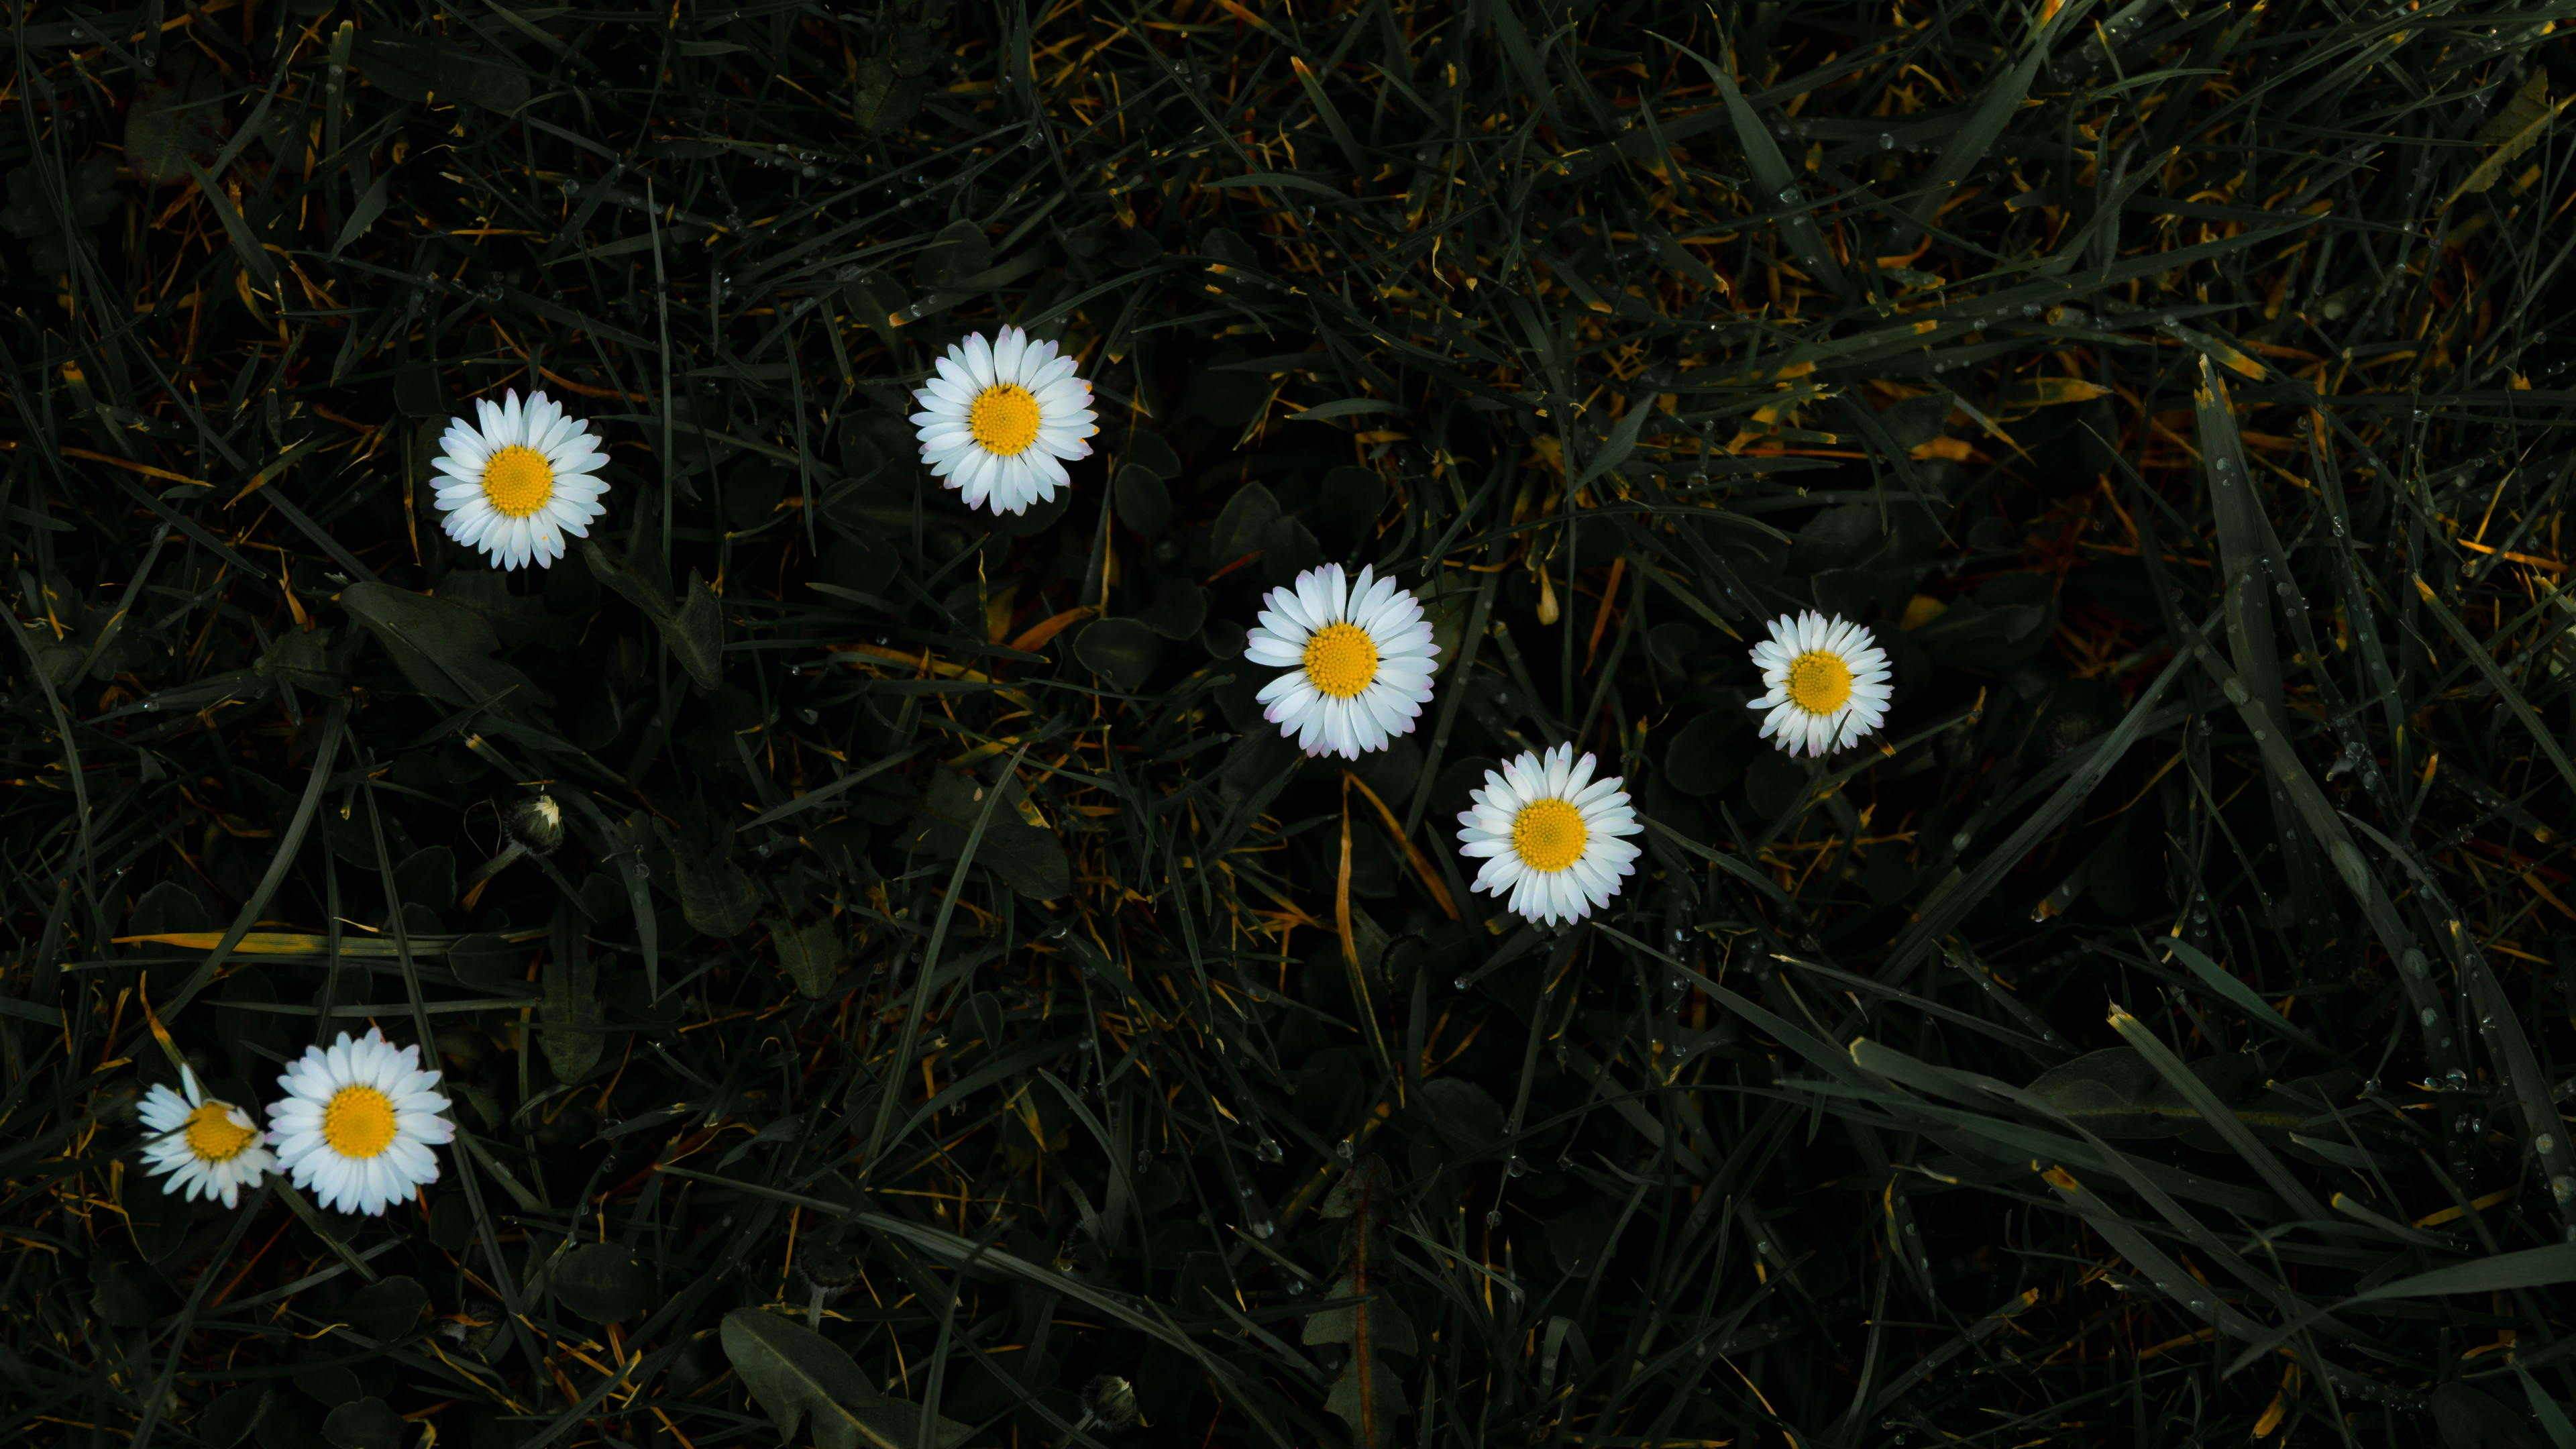 White Daisies in Bloom During Daytime. Wallpaper in 3840x2160 Resolution